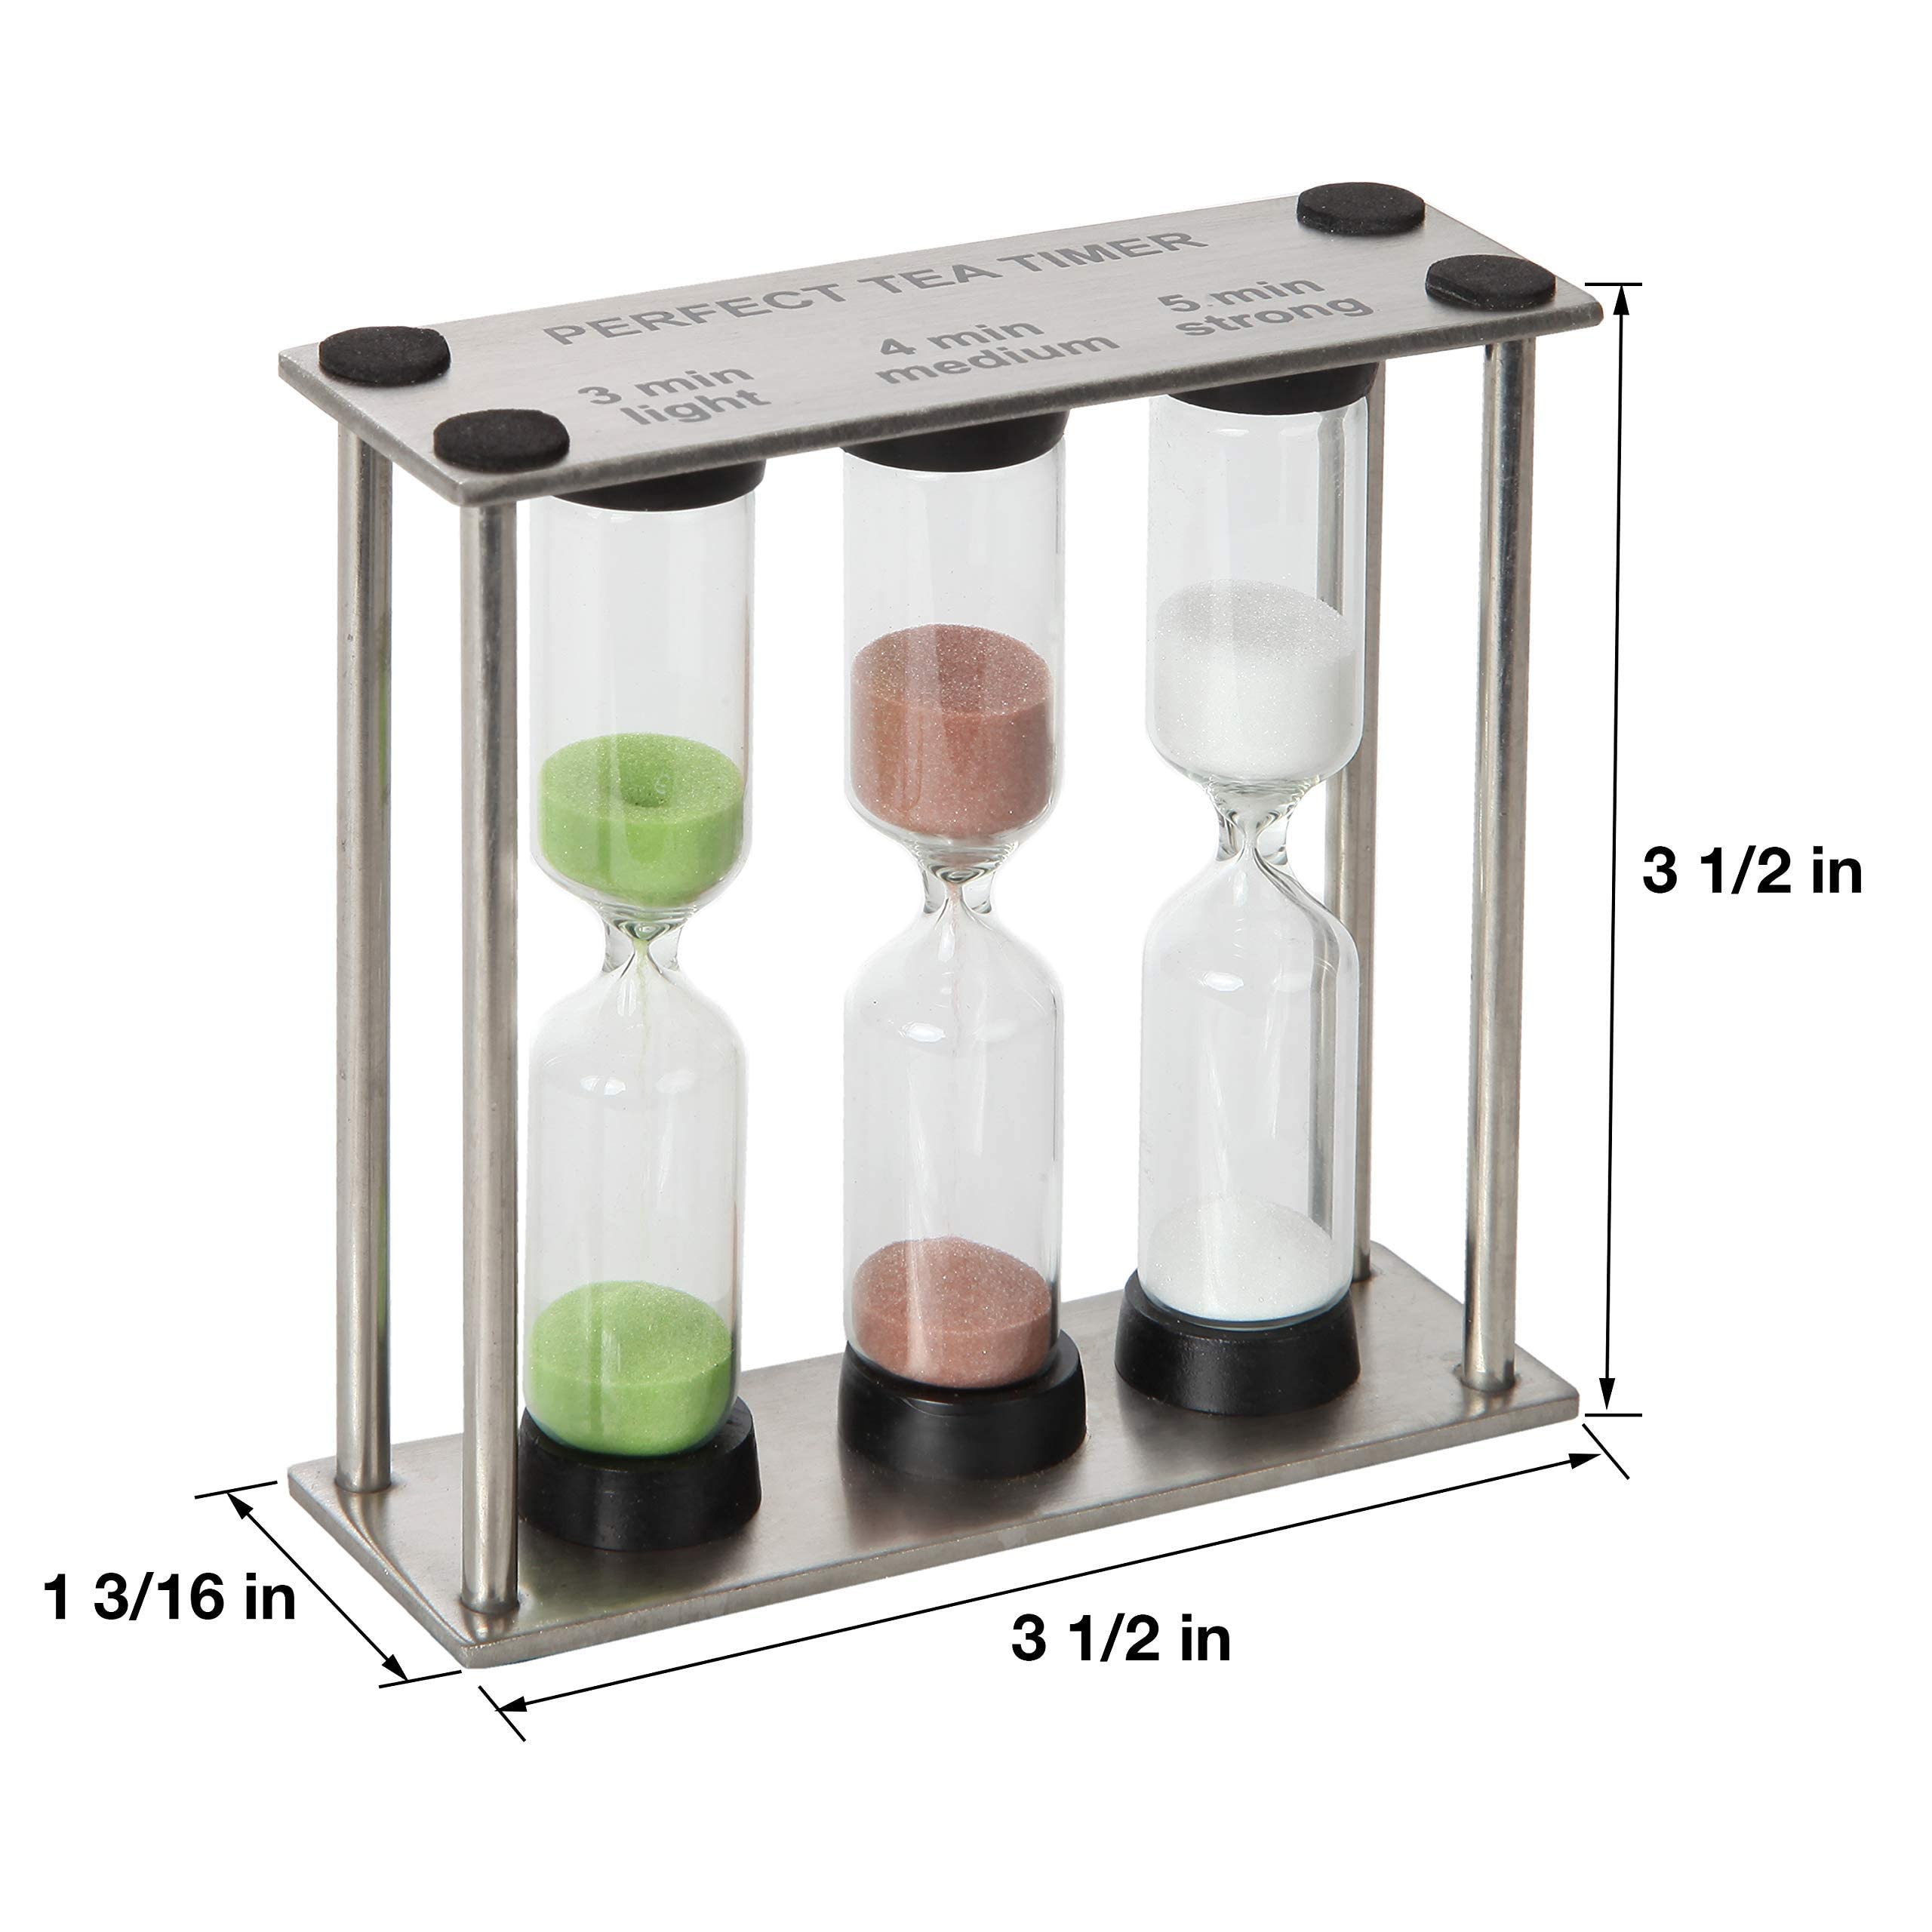 Lily's Home 3-in-1 Perfect Tea Timer, Includes 3, 4, and 5 Minute Sand Hourglass Timers, Use for Making Tea or Keeping Time Around The Kitchen, Brushed Stainless Steel Frame (3.75" Tall)